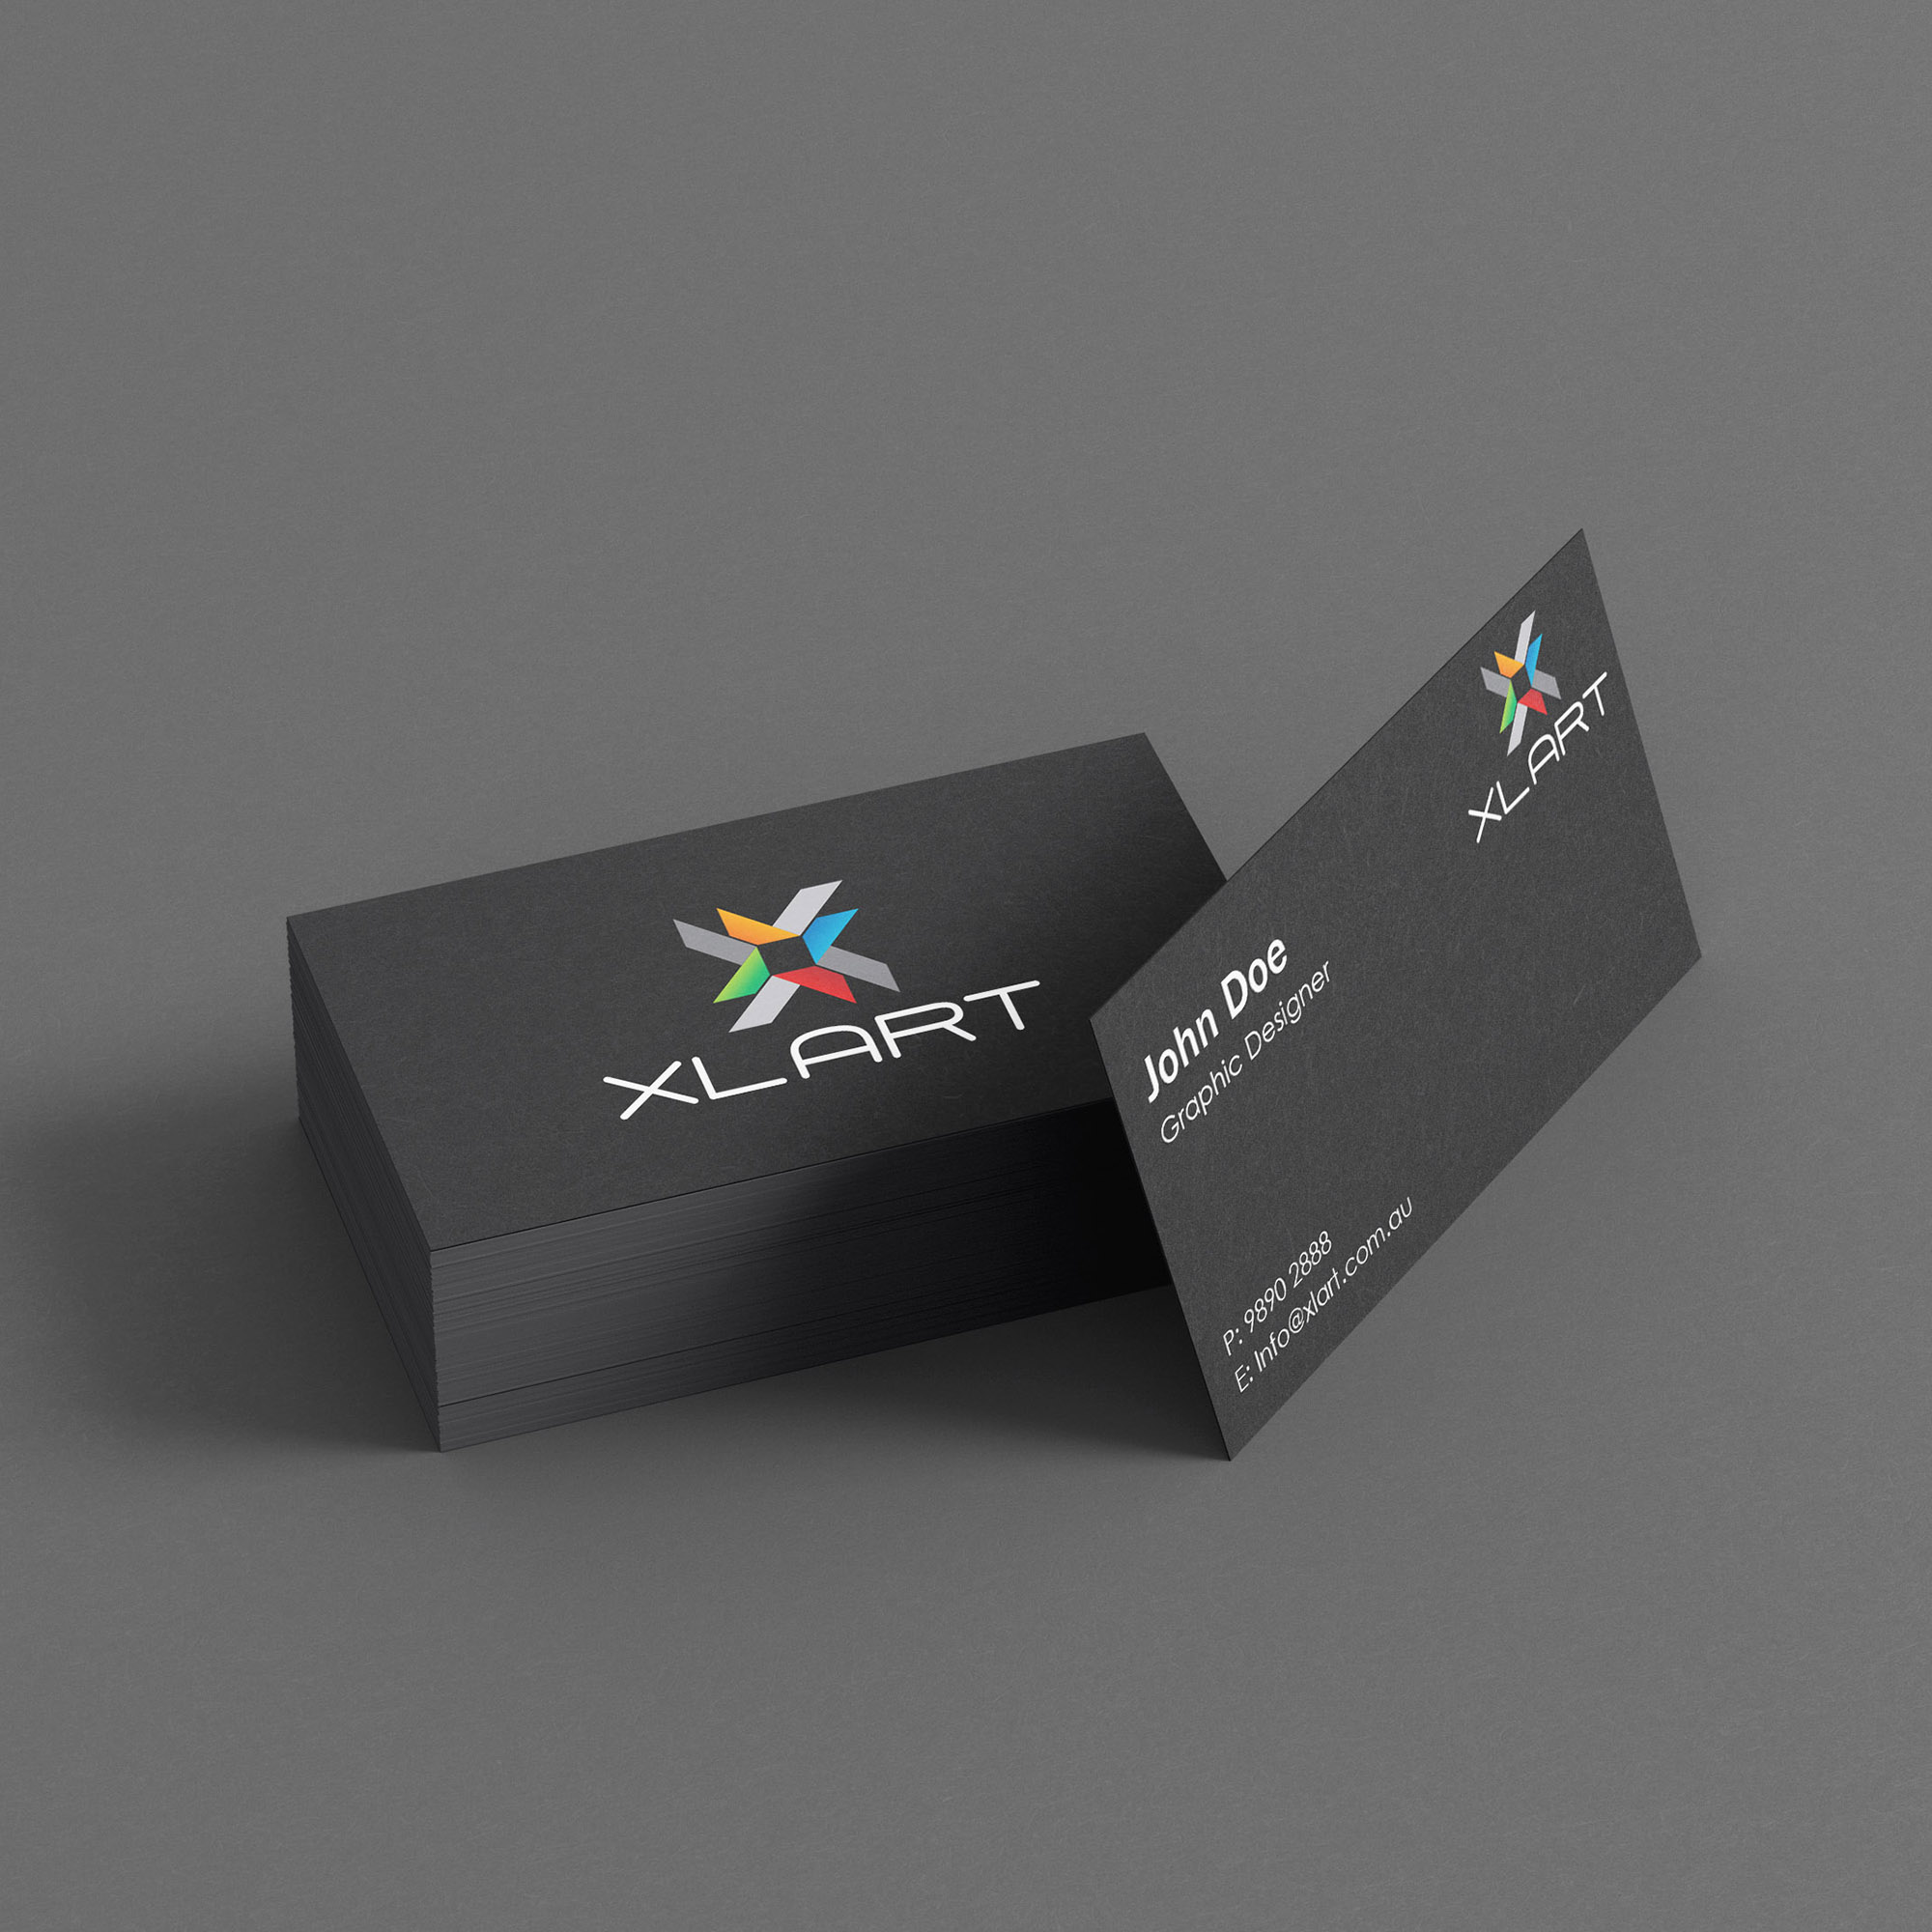 How Big Are Business Cards - Business Card Sizes : Space age translucent business cards.